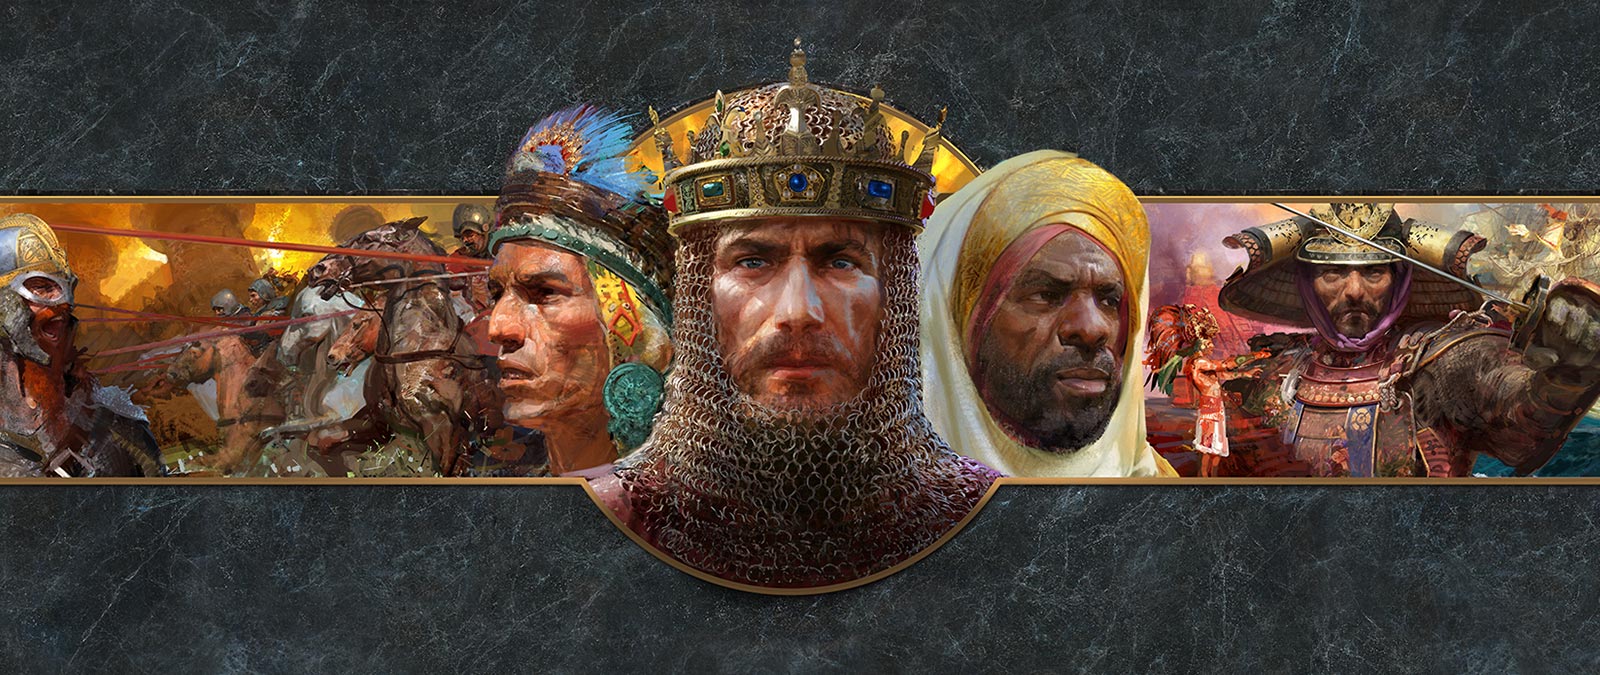 The headshots of leaders from different civilizations are shown in front of scenes of battle.